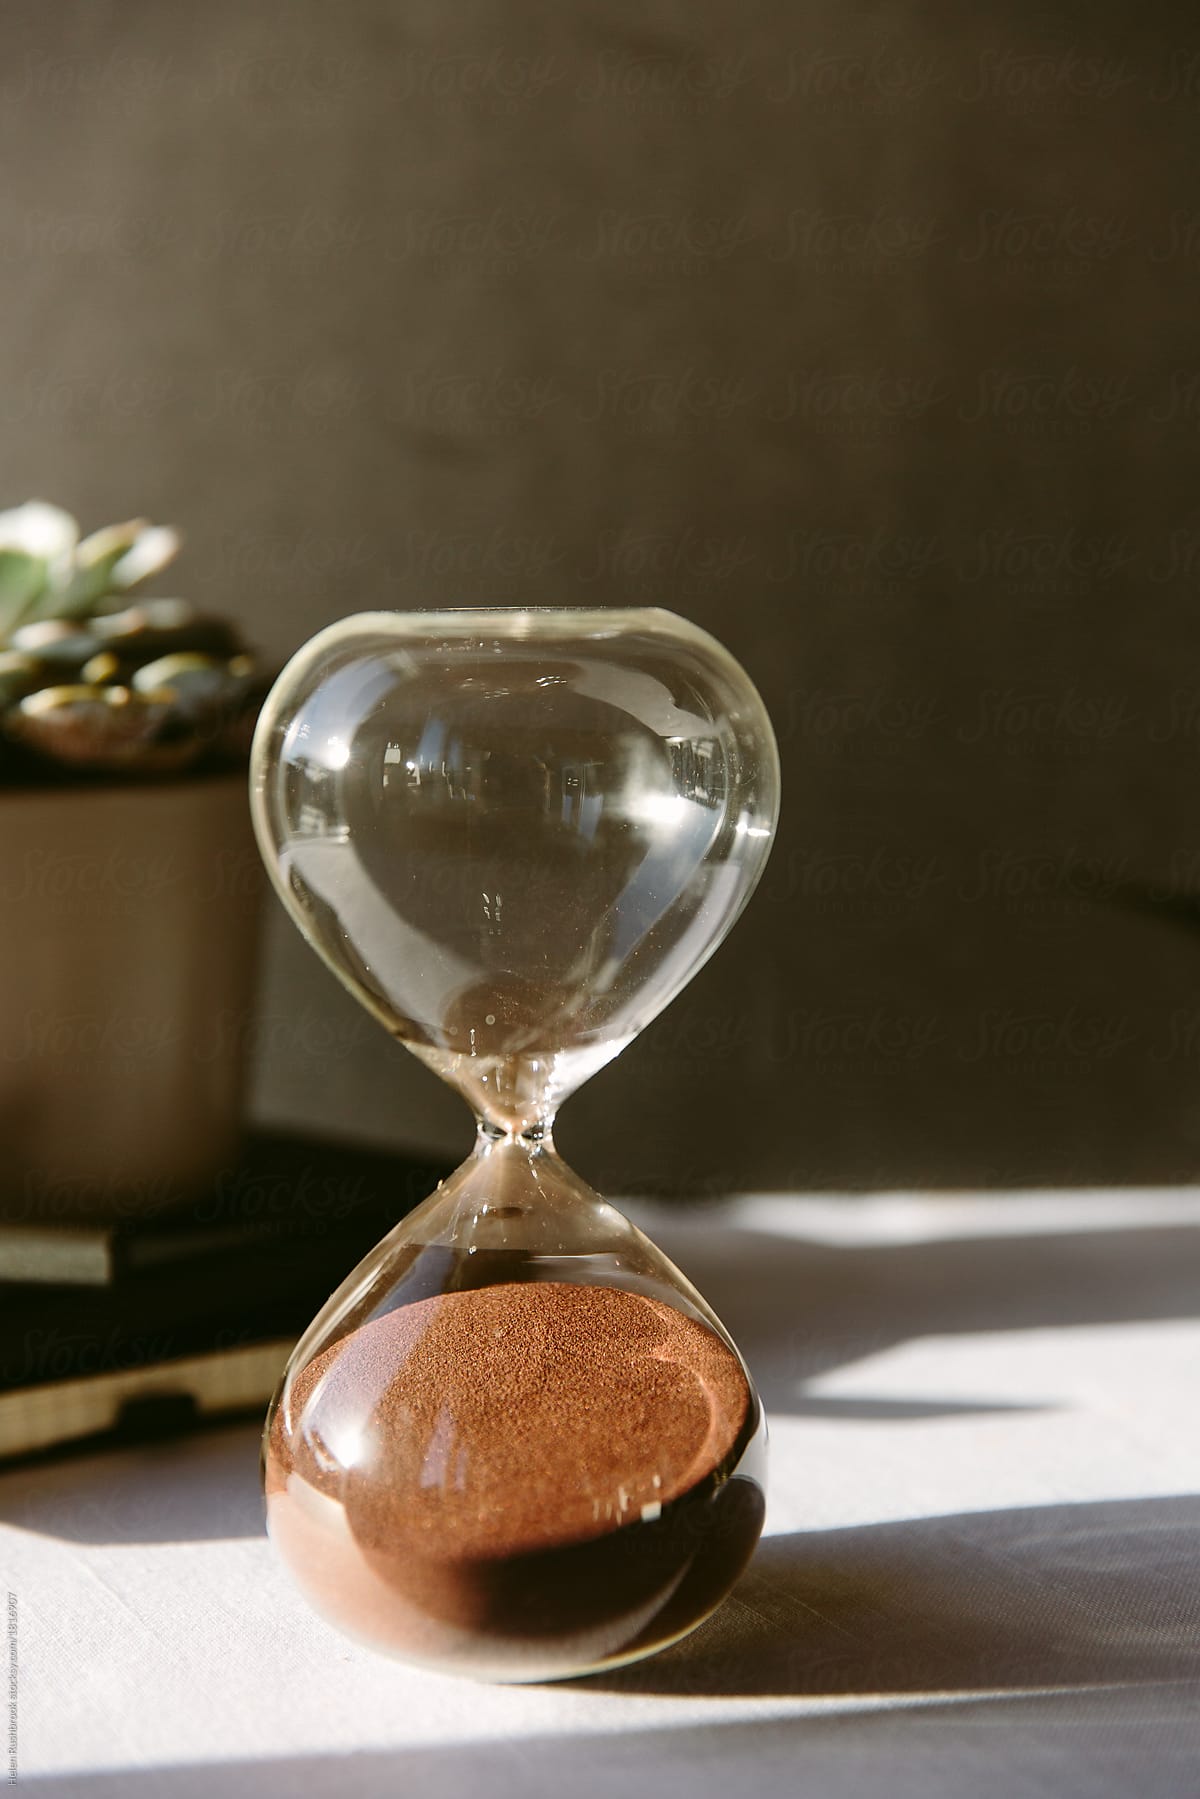 A sand timer through which all of the sand has run, indicating that time is up.